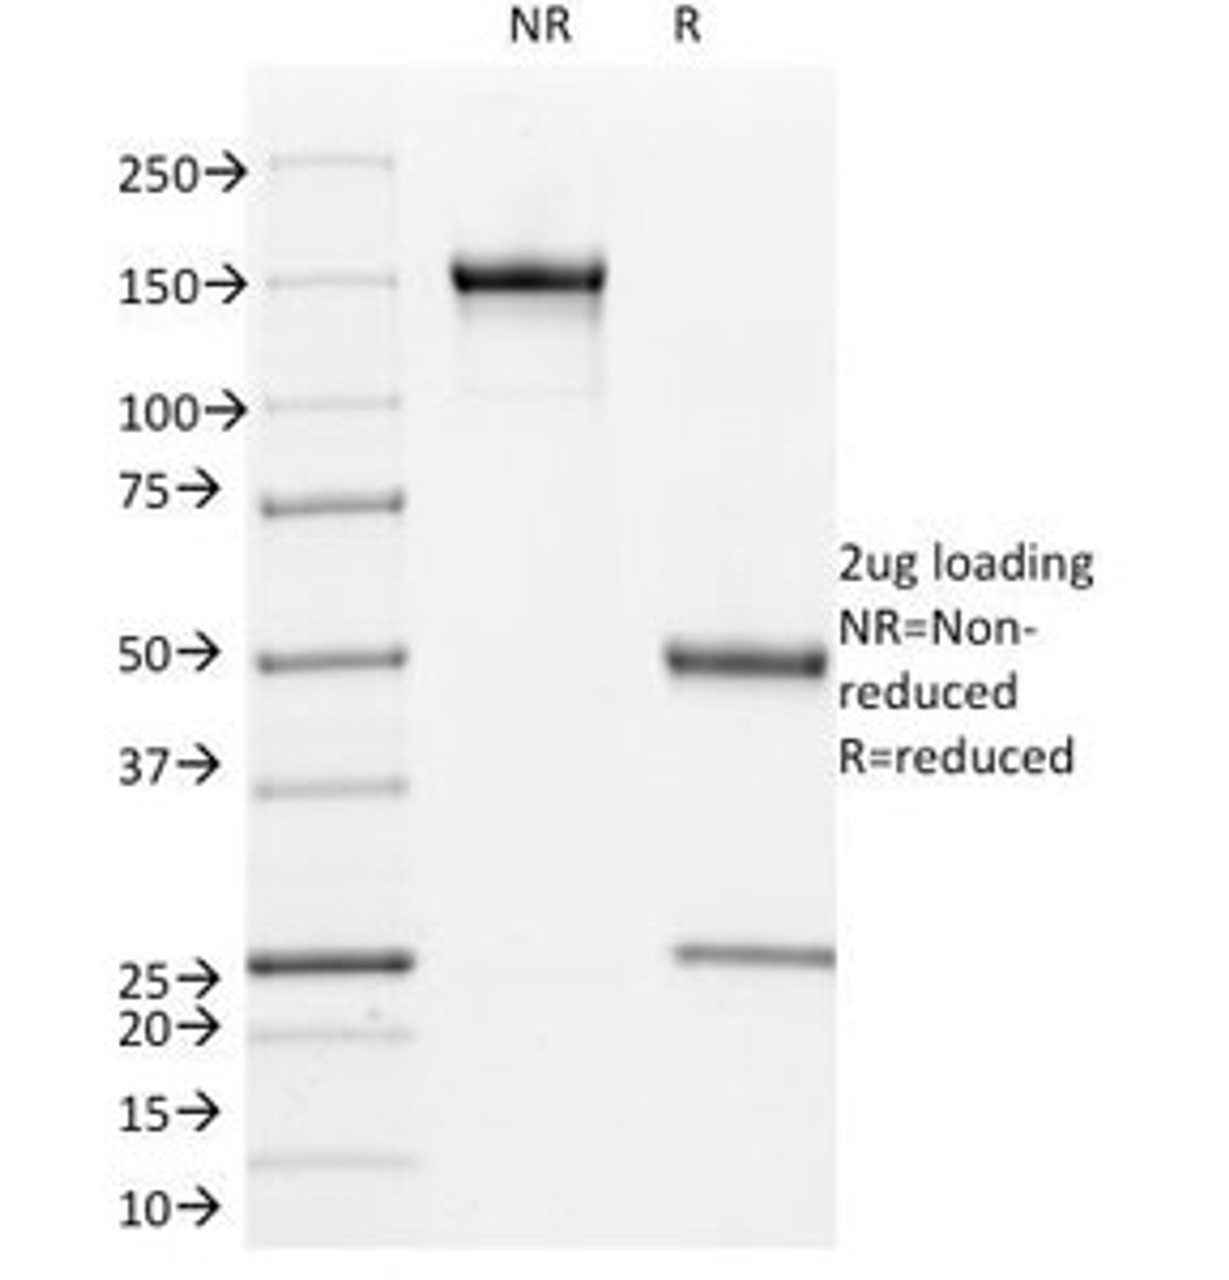 SDS-PAGE Analysis of Purified, BSA-Free L1CAM Antibody (clone UJ127) . Confirmation of Integrity and Purity of the Antibody.